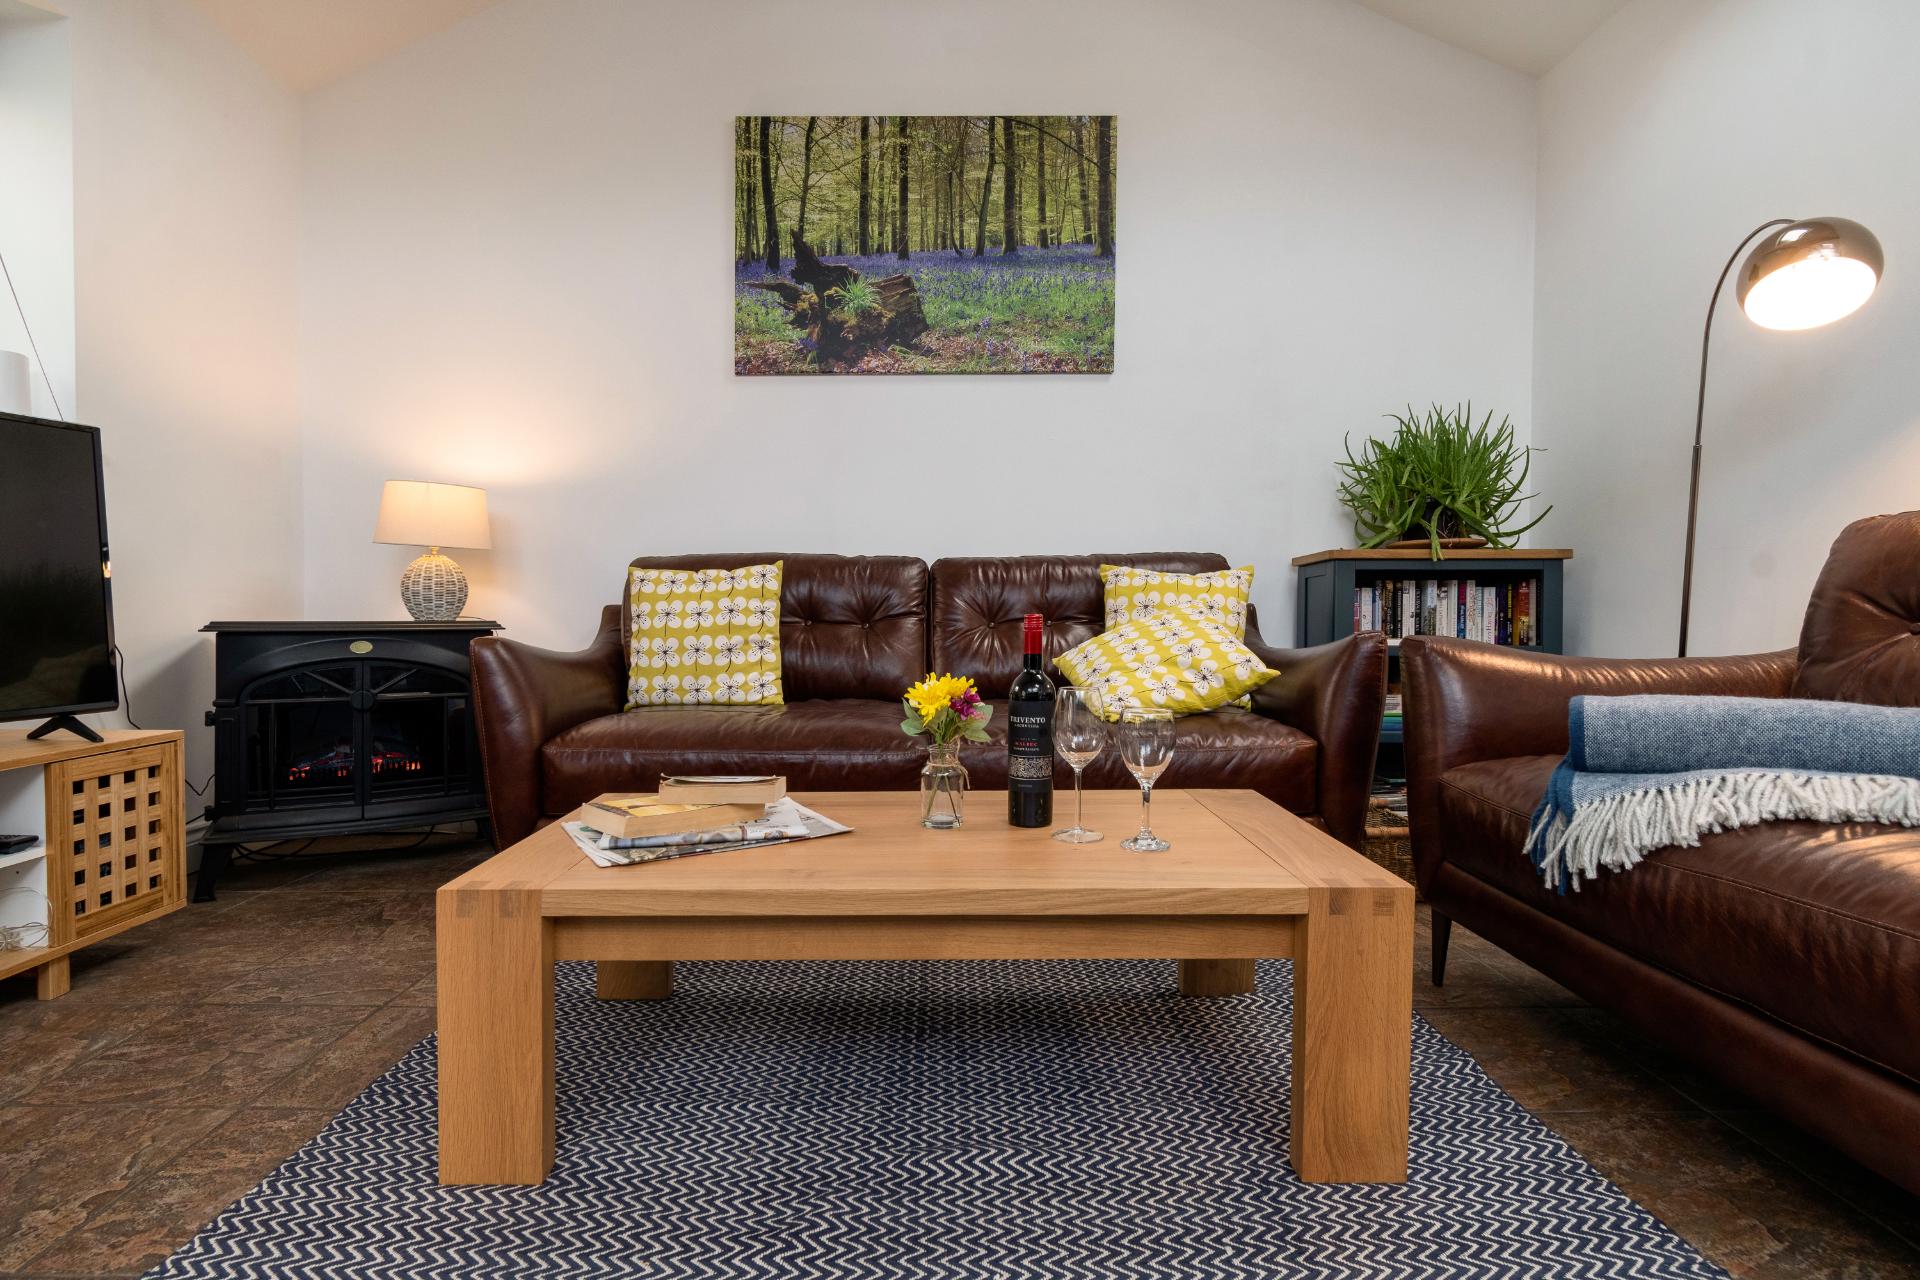 Luxury holiday accommodation in Forest of Dean